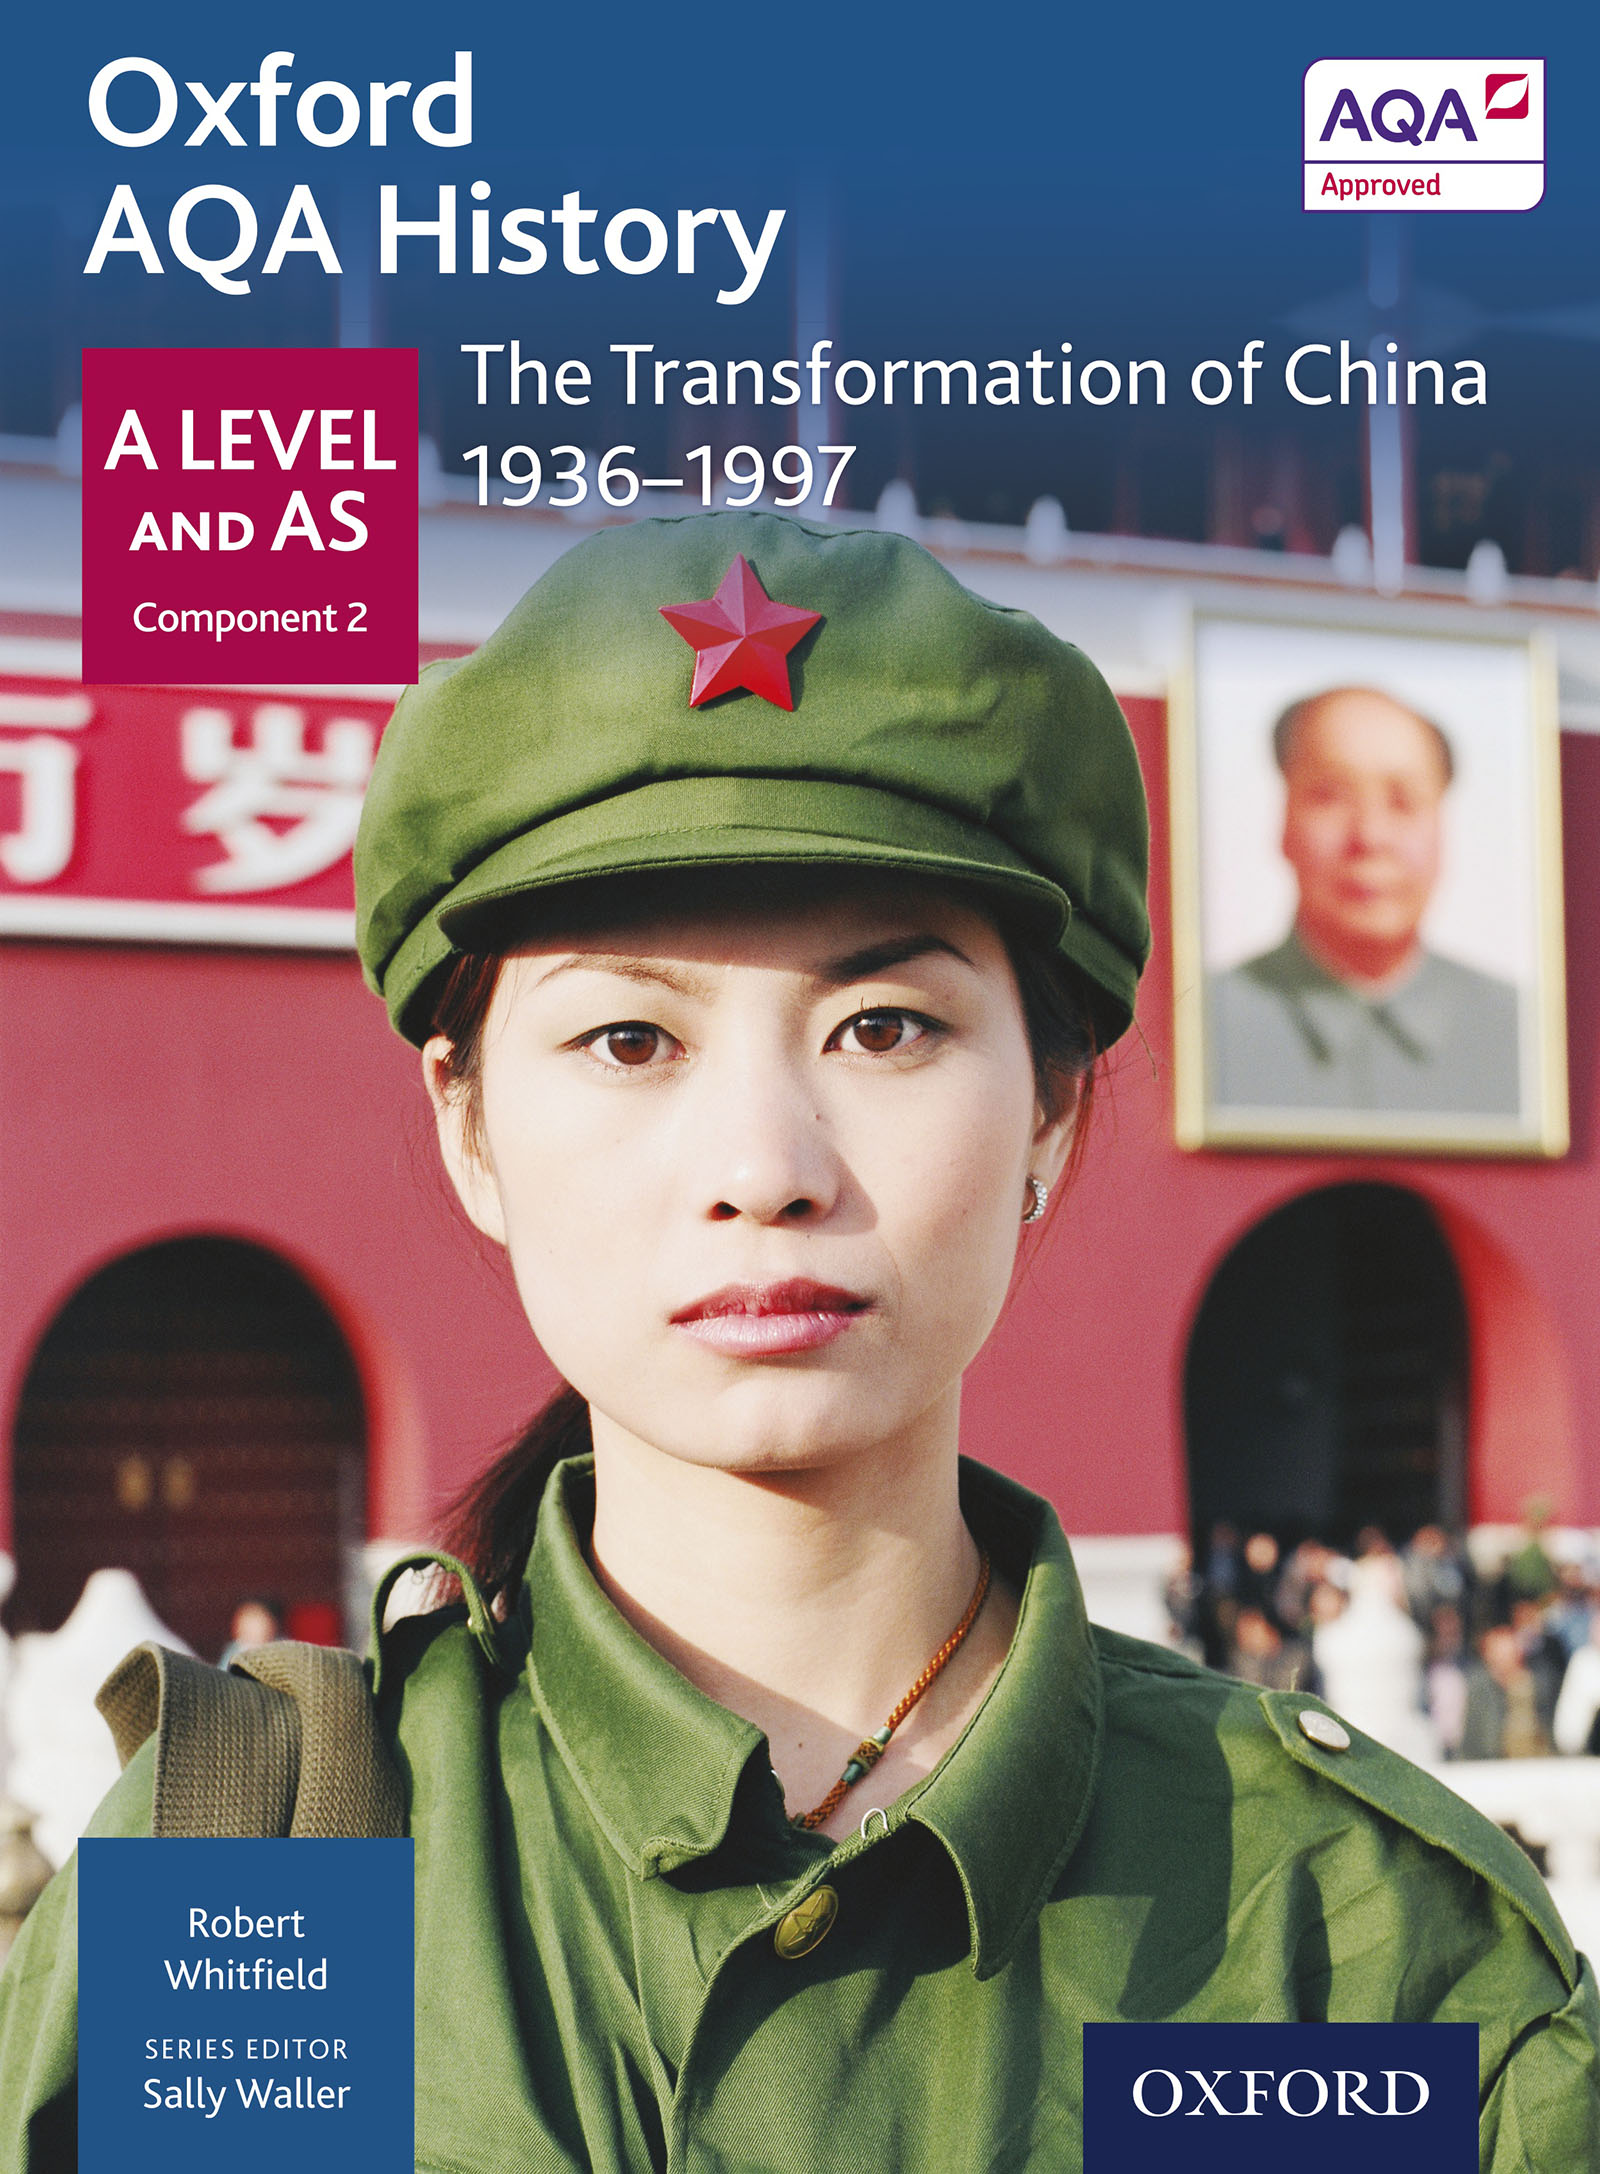 9780198363910Oxford AQA History: A Level and AS Component 2: The Transformation of China 1936-1996